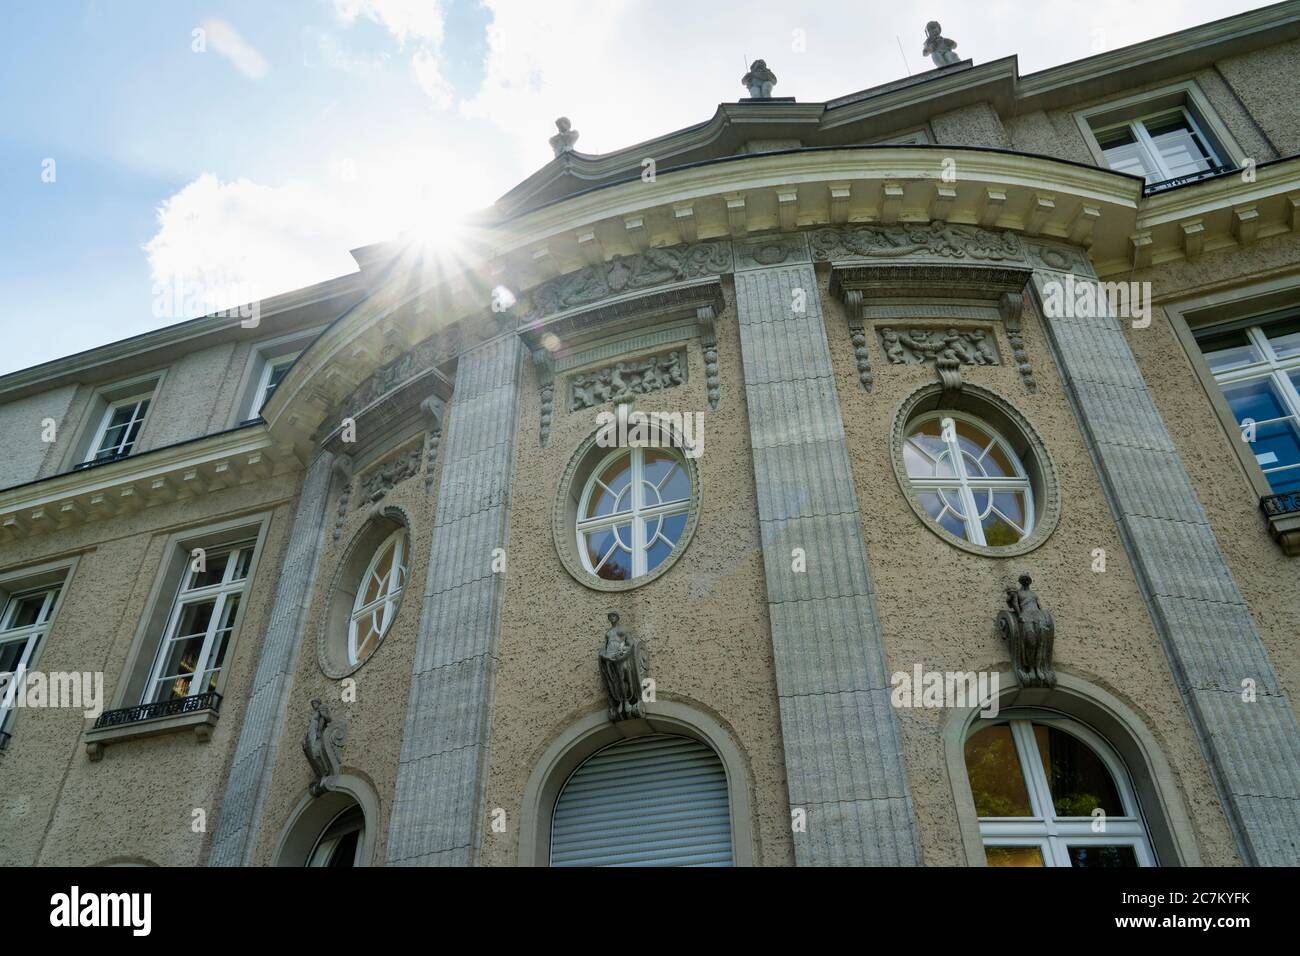 Berlin, Wannsee, House of the Wannsee Conference, sun rays Stock Photo